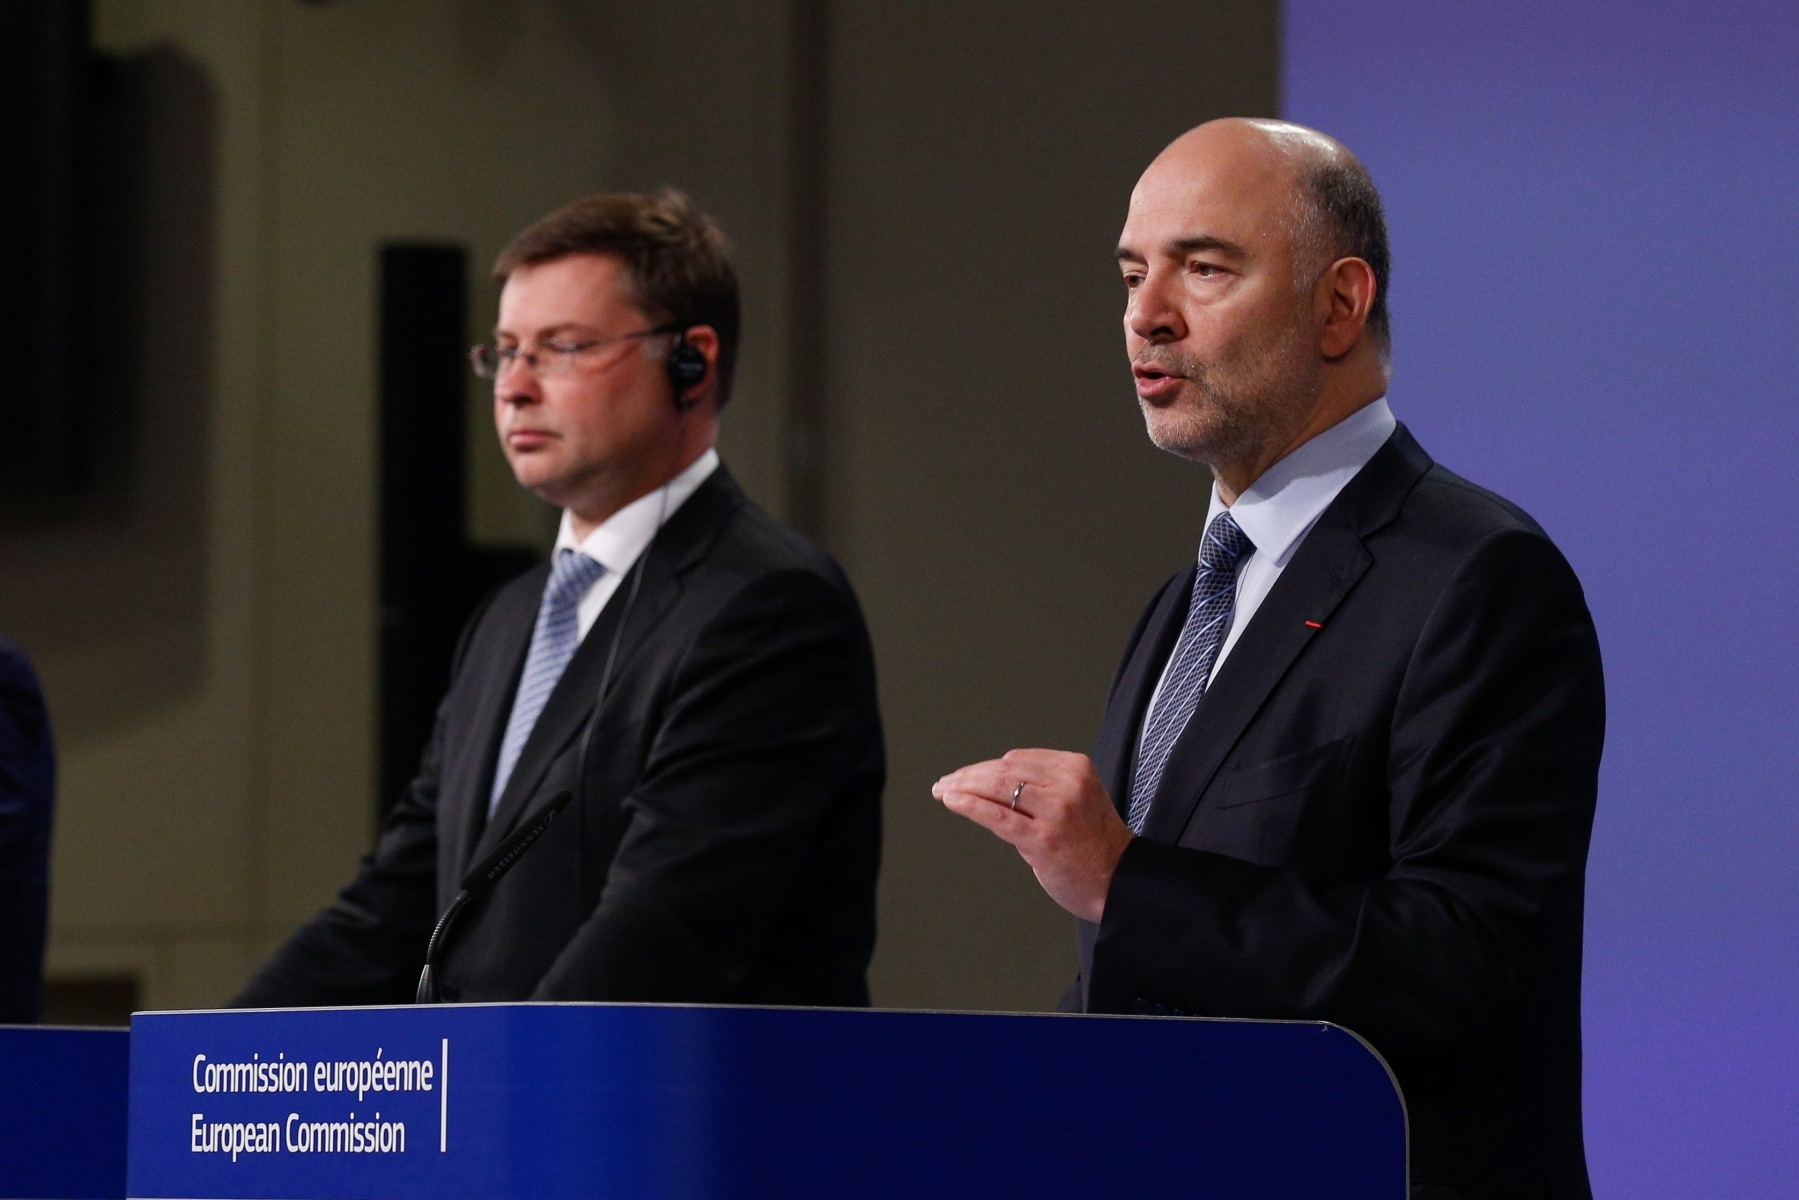 epa05443454 European Commissioner for Economic and Financial Affairs, Pierre Moscovici (R) and European Commission Vice-President in charge of the Euro and Social Dialogue, Valdis Dombrovskis during a press conference in Brussels, Belgium, 27 July 2016. The European Commission today adopted a Rule of Law Recommendation on the situation in Poland, setting out the Commission's concerns and recommending how these can be addressed.  EPA/LAURENT DUBRULE BELGIUM EU COMMISSION